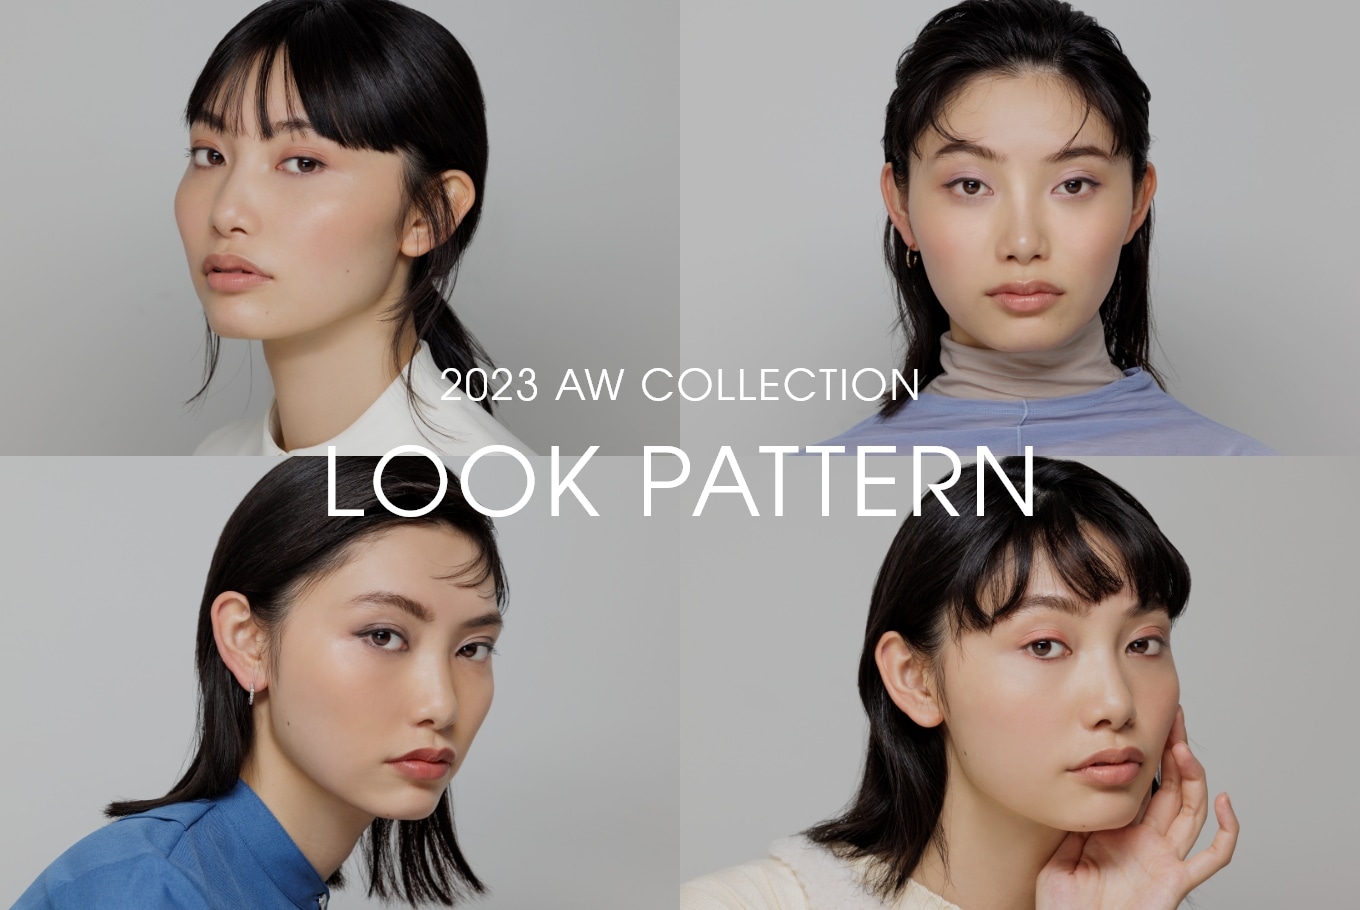 2023awcollection_LOOK